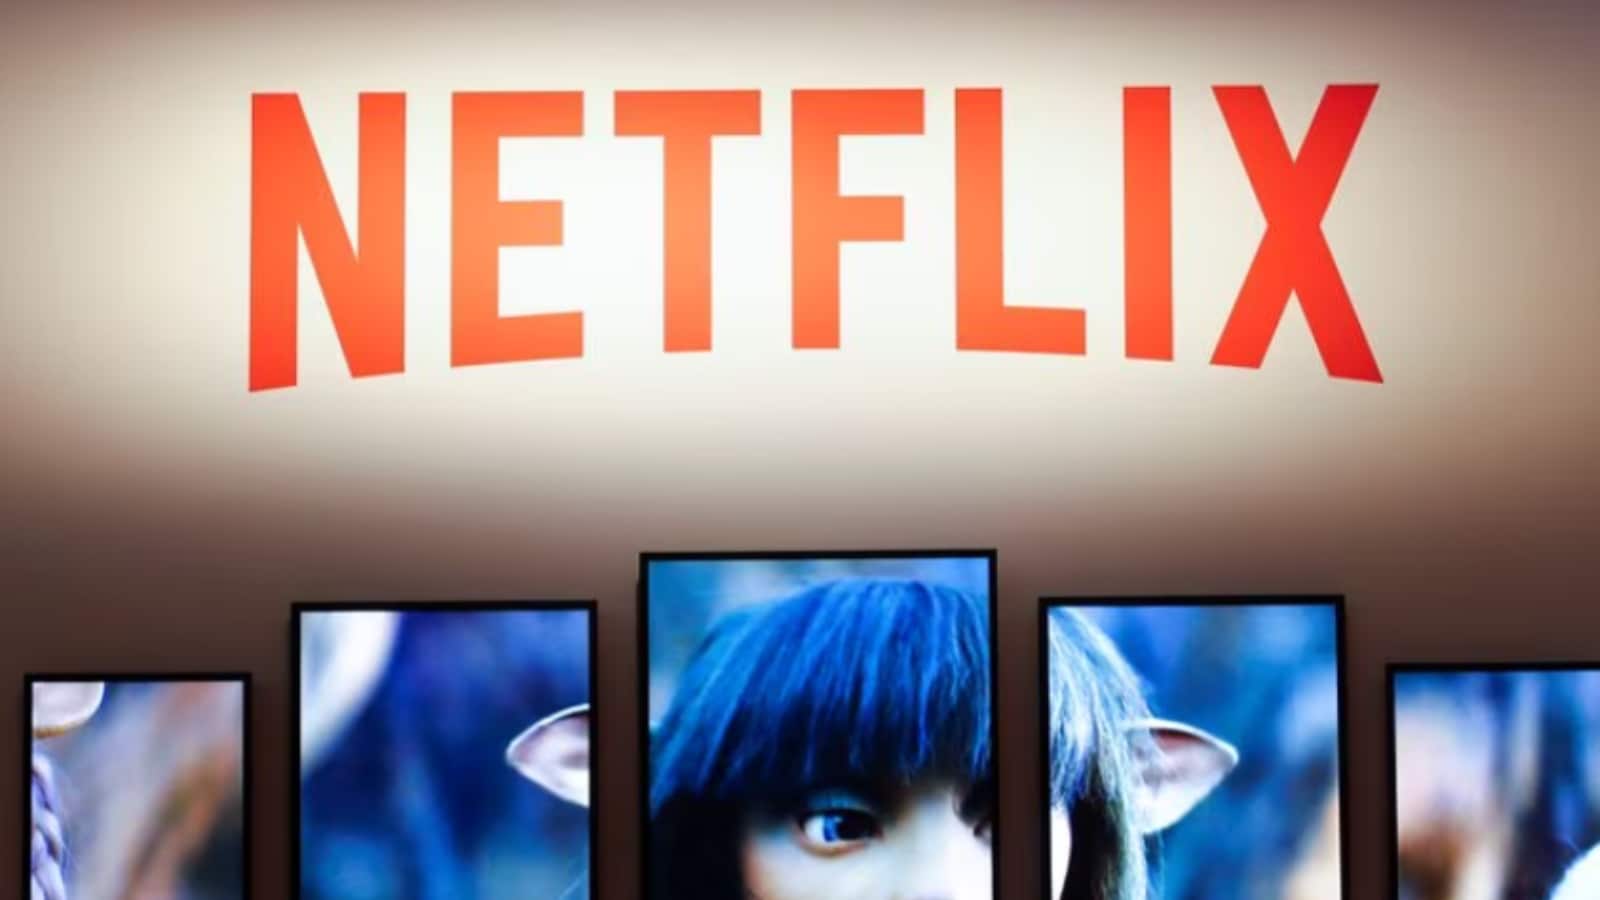 Netflix To End Password Sharing In India: Here Is Why & What To Expect